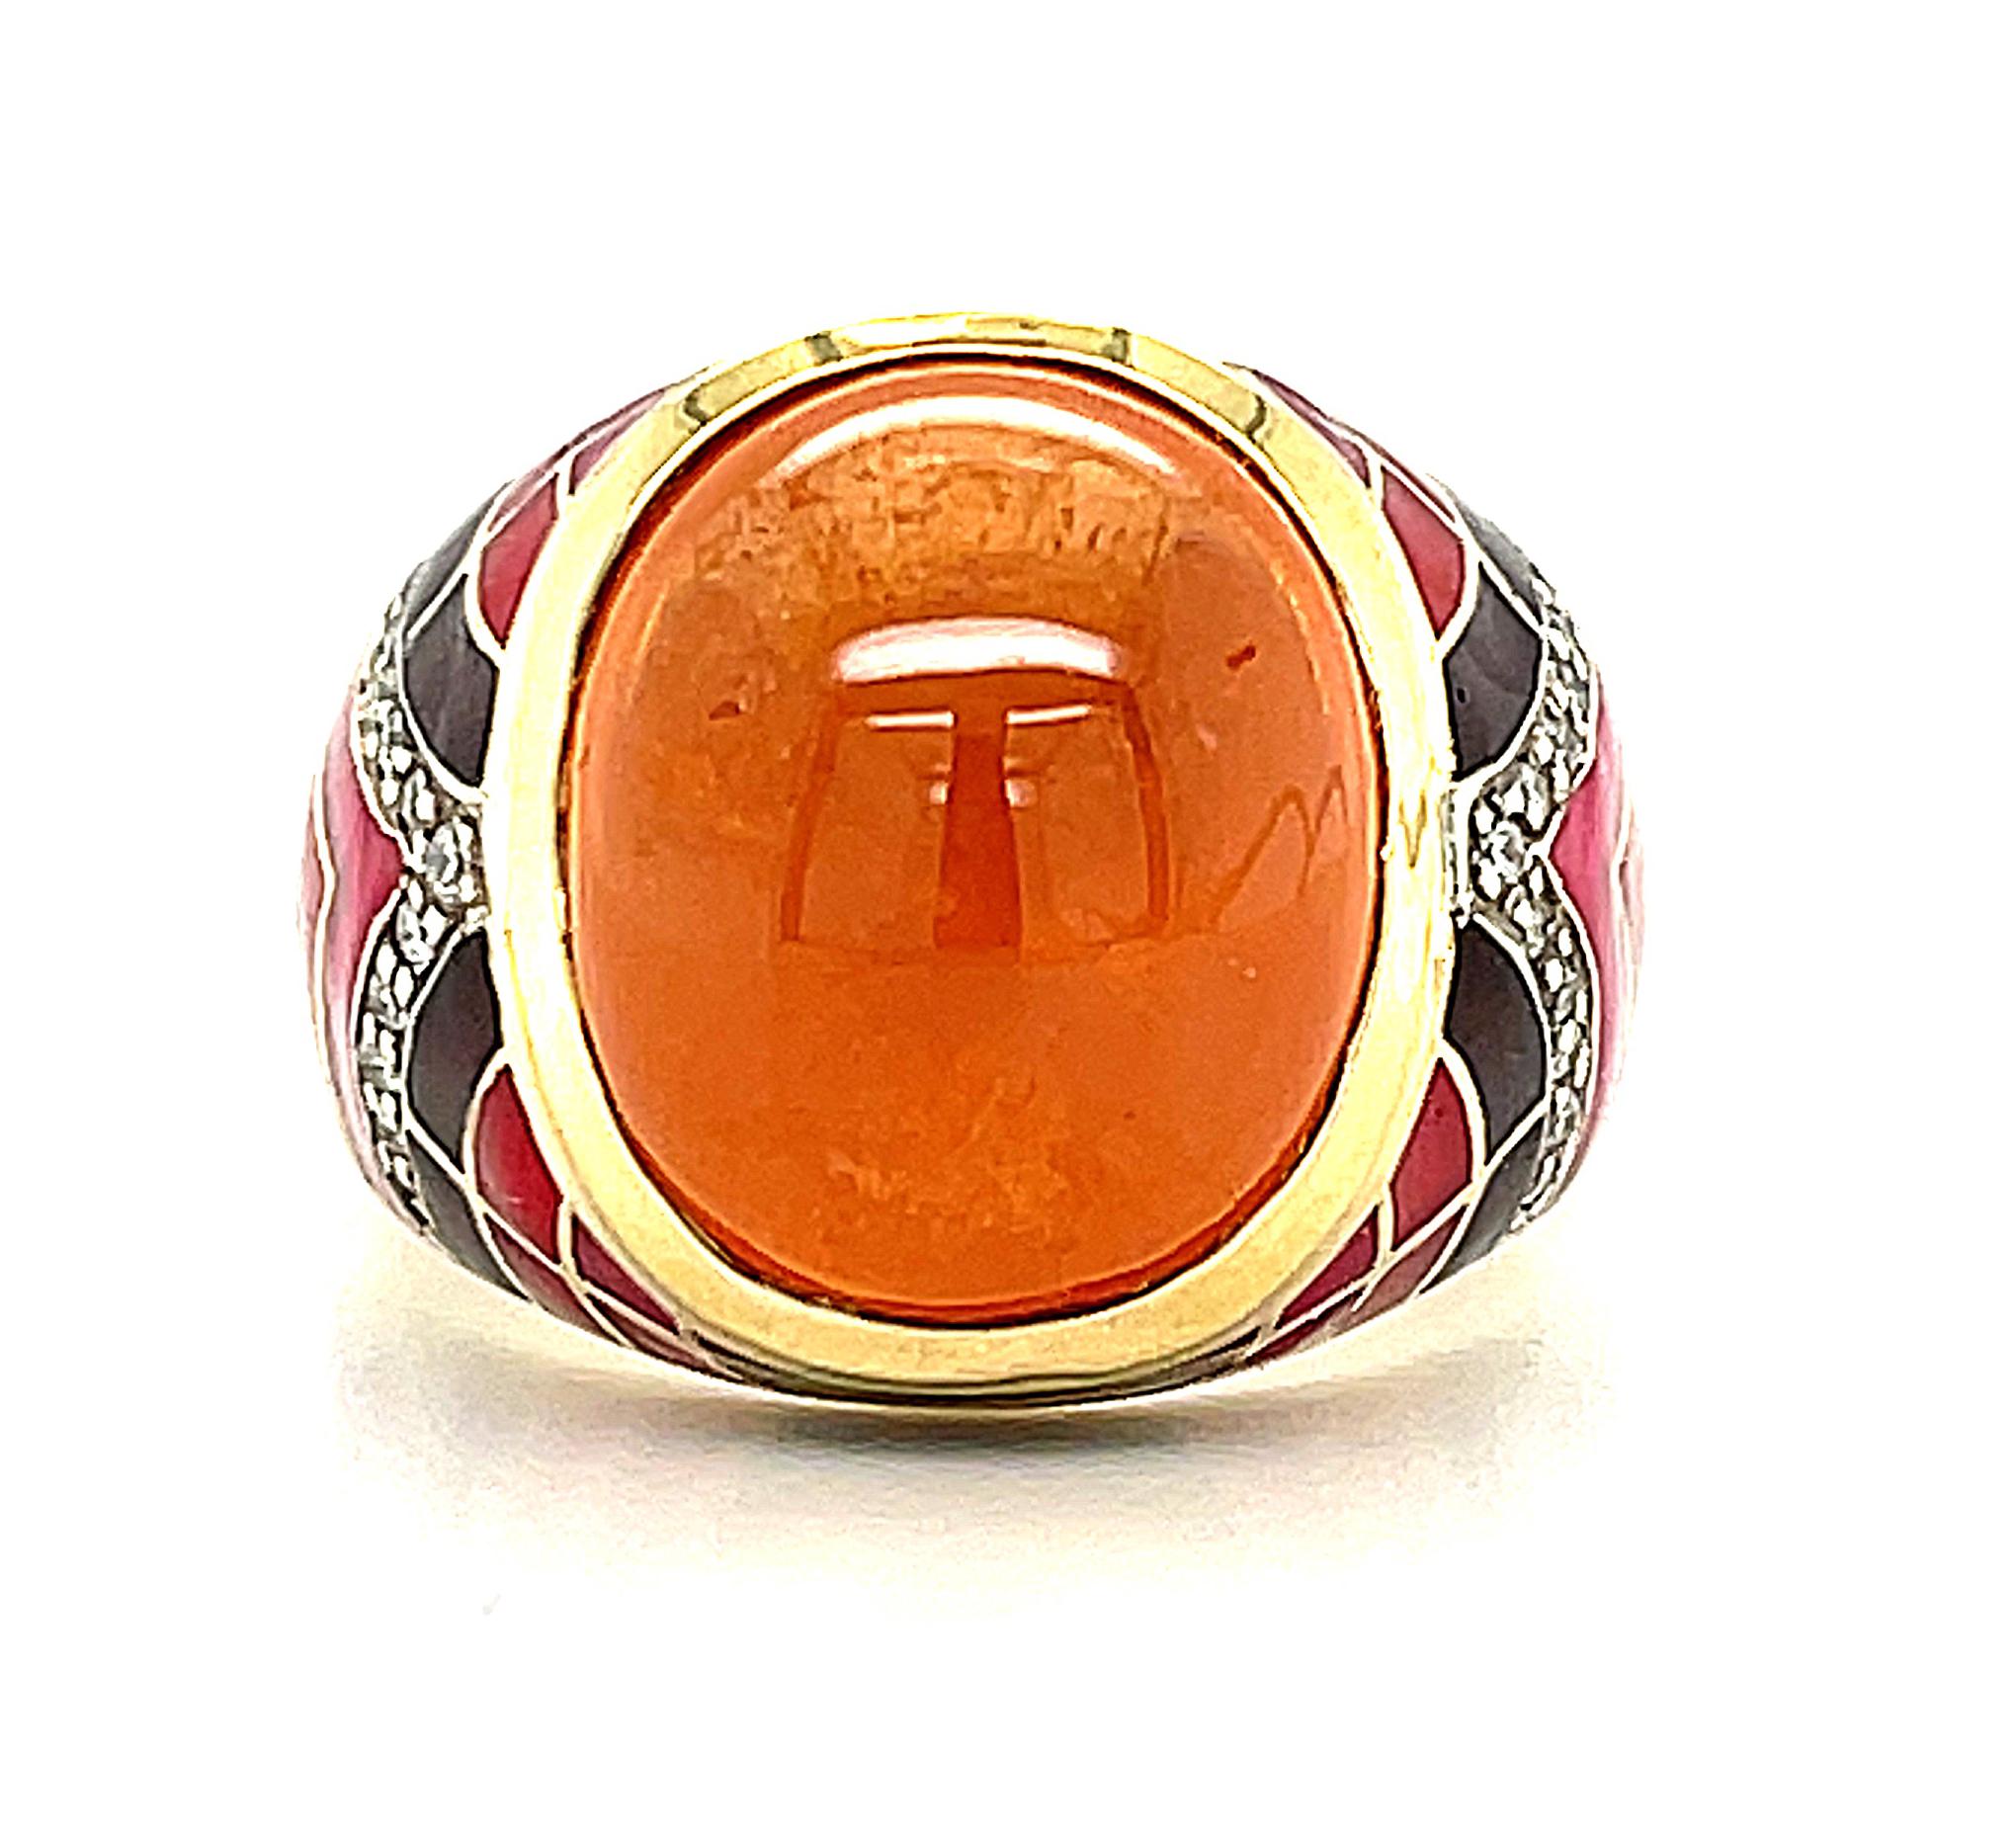 This beautifully designed ring features a large oval spessartite garnet cabochon weighing 14.79 carats that is the color of a bright mandarin orange, hence its nickname, 